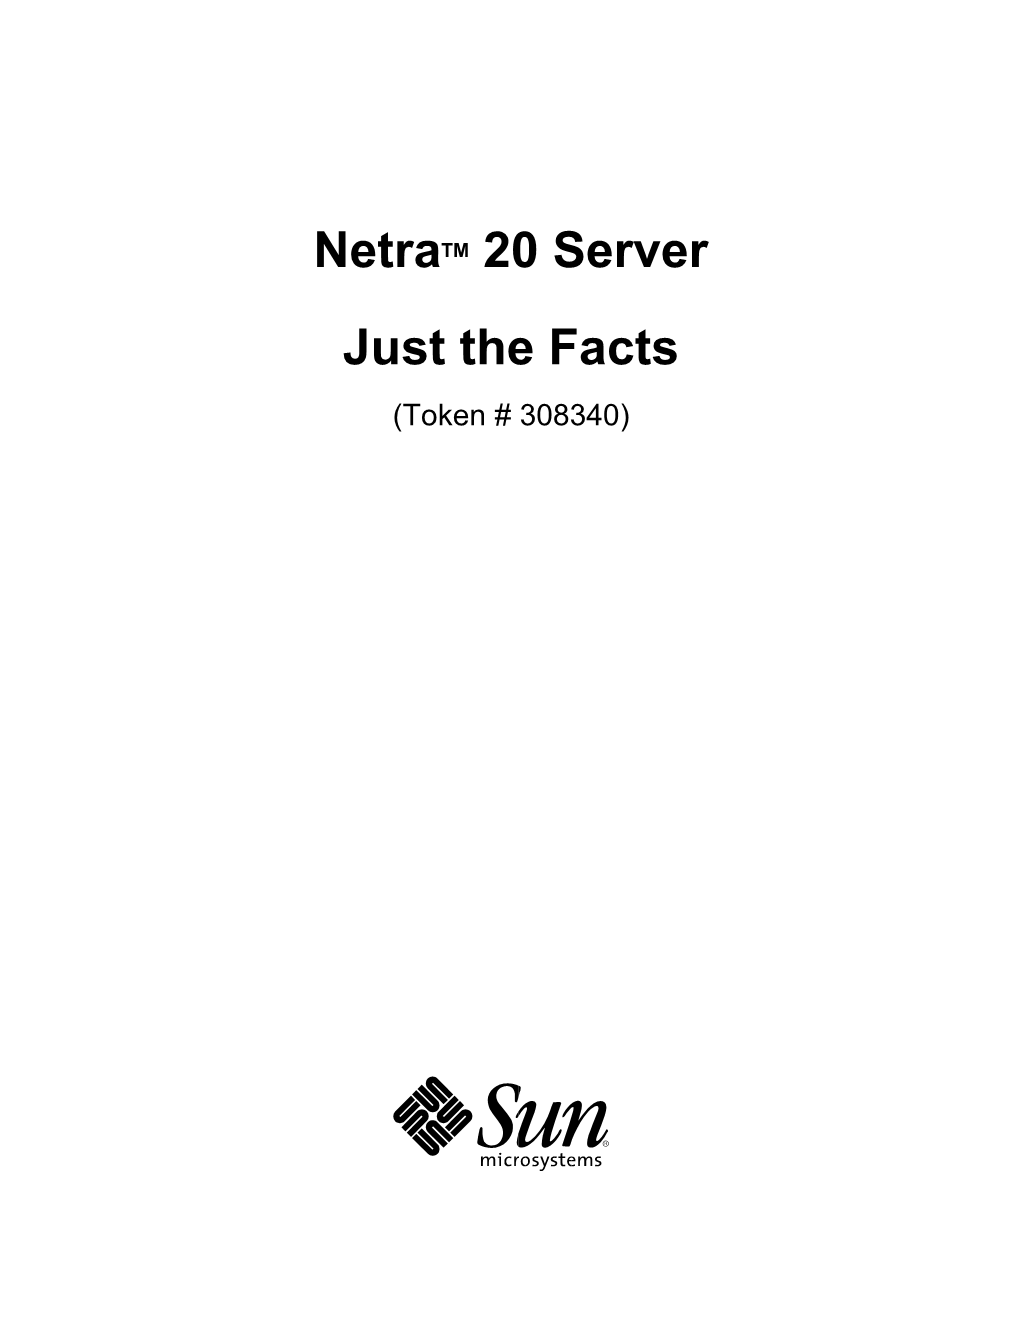 Netratm 20 Server Just the Facts (Token # 308340)